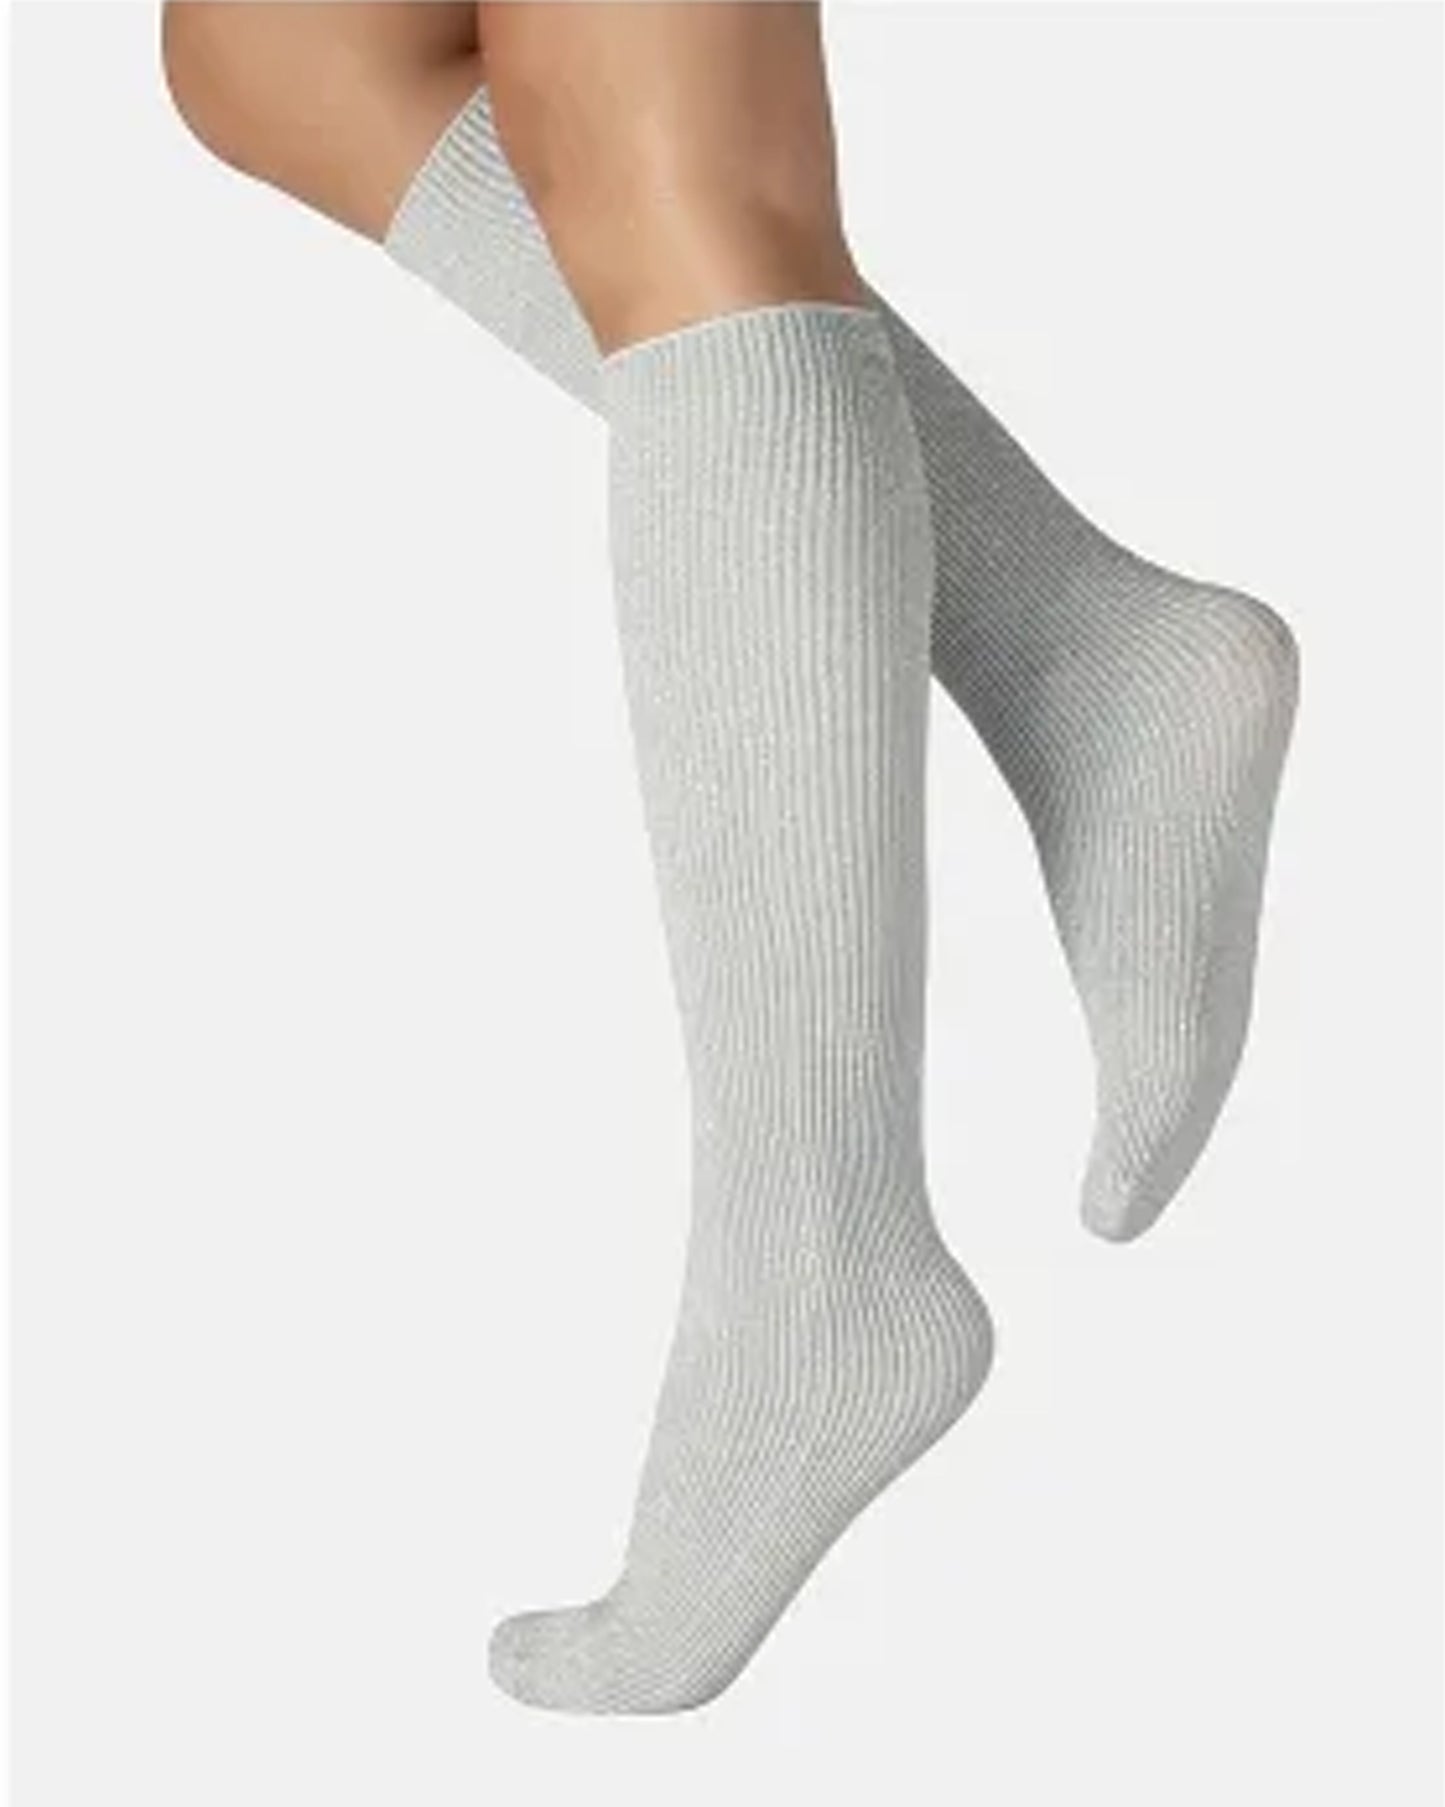 Calzitaly Glitter Rib Sock - Silver grey opaque knee-high fashion ribbed socks with silver lamé